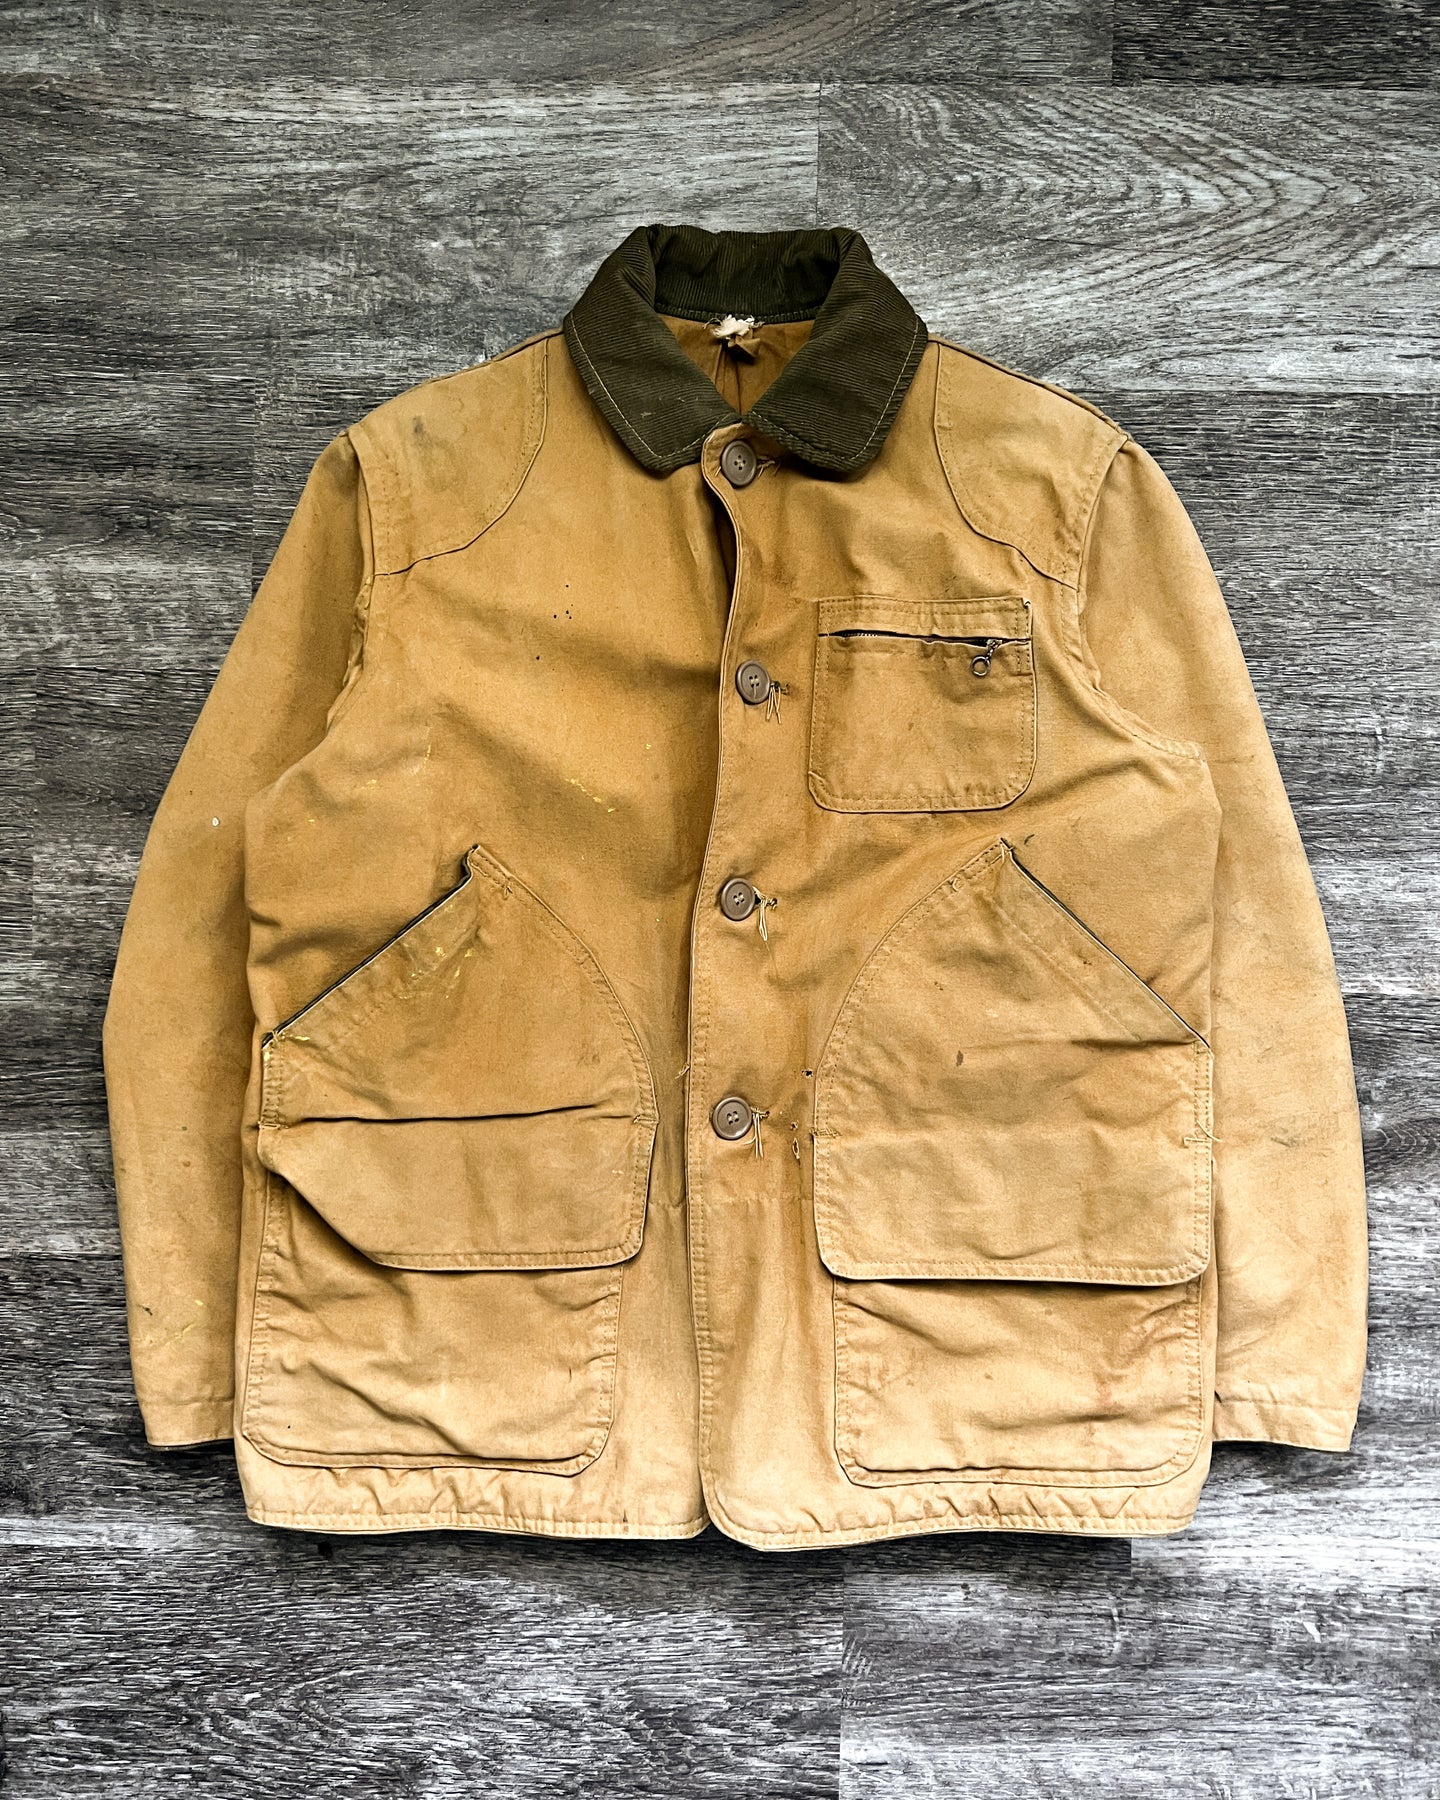 1960s Painted Canvas Hunting Jacket - Size Large